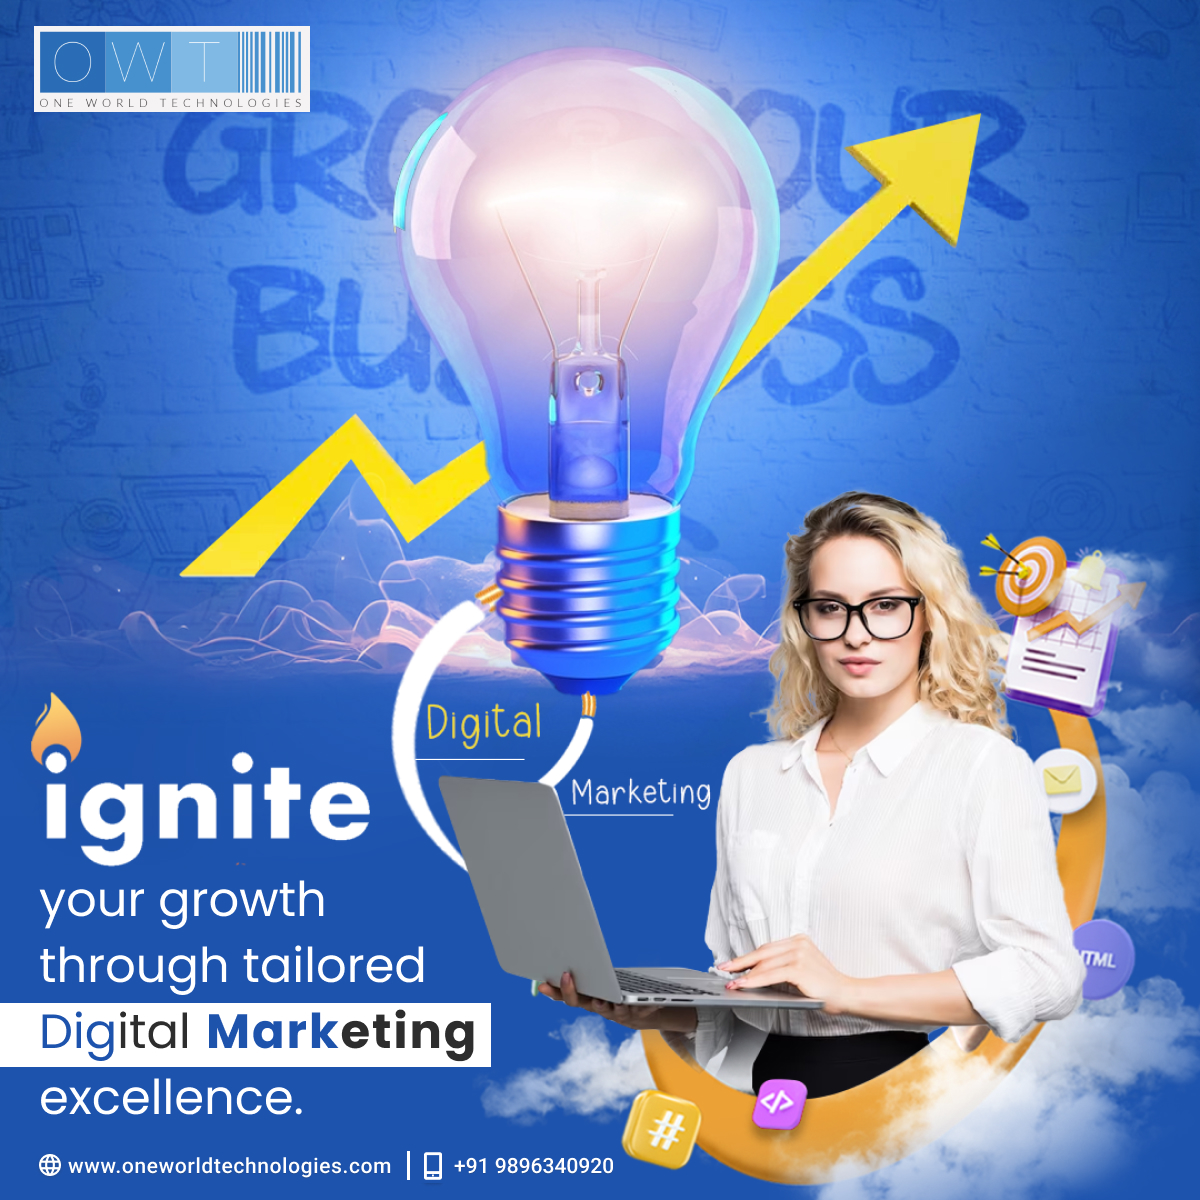 Ignite your growth and fuel your success with tailored digital marketing excellence, brought to you by One World Technologies. 
#DigitalMarketingExcellence #IgniteYourGrowth #TailoredStrategies #OneWorldTechnologies #DigitalSuccess